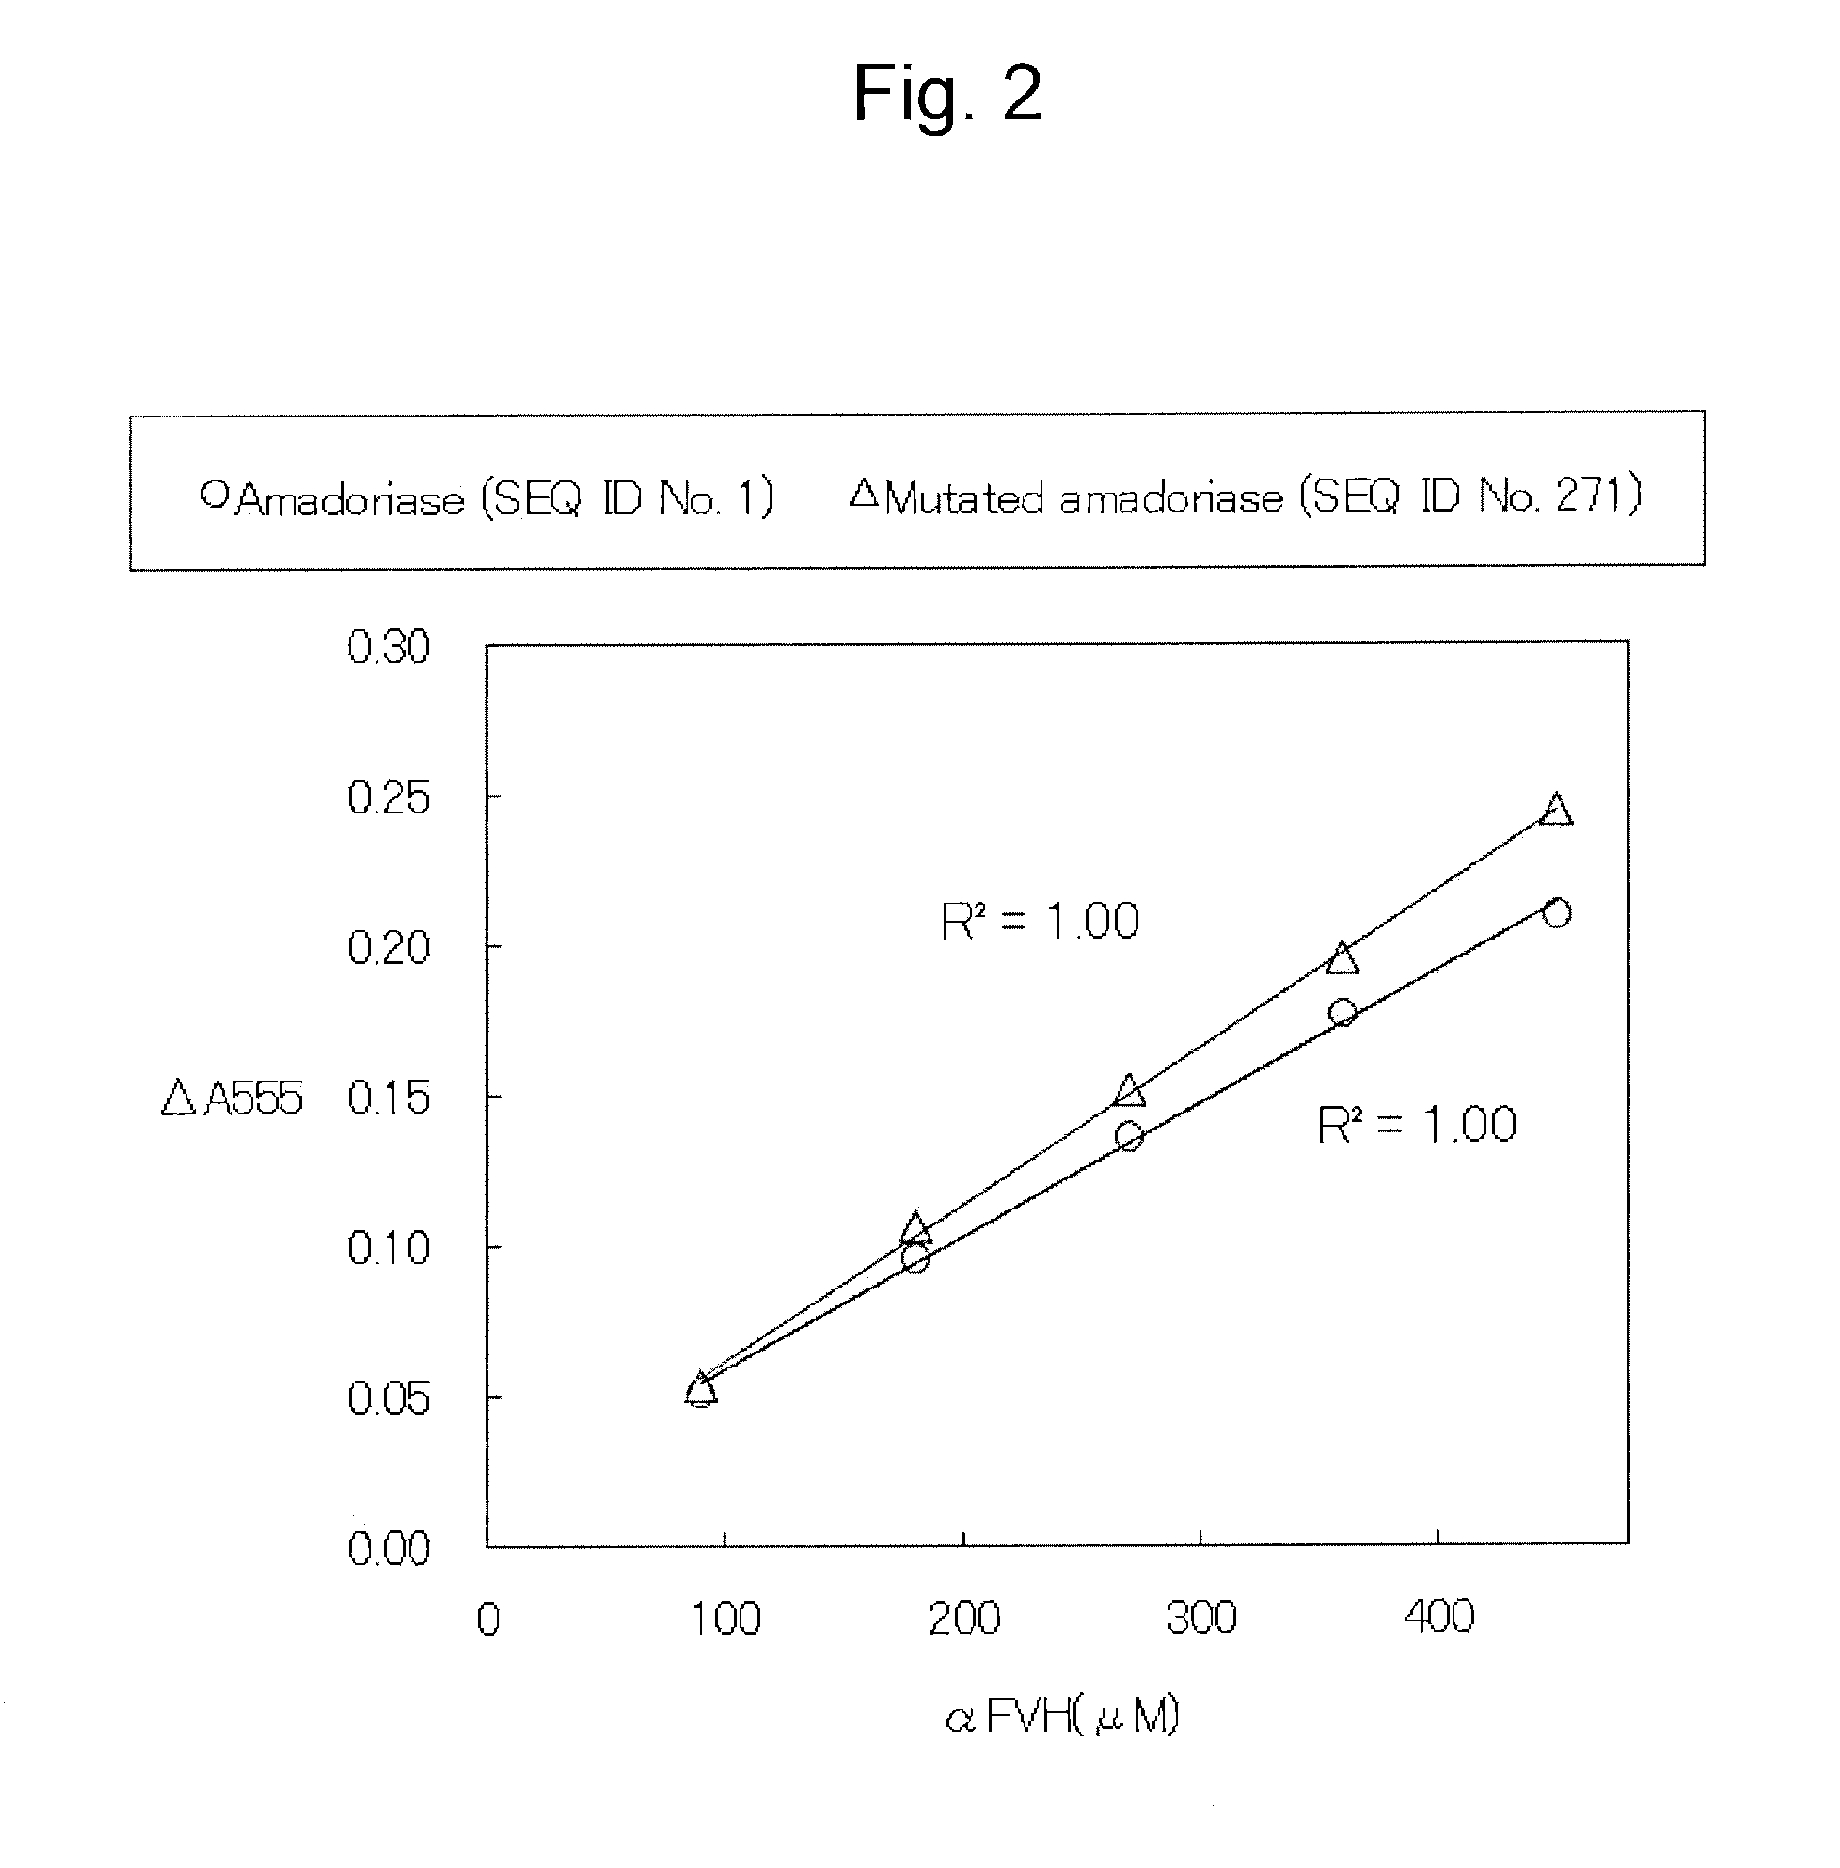 Amadoriase having altered substrate specificity